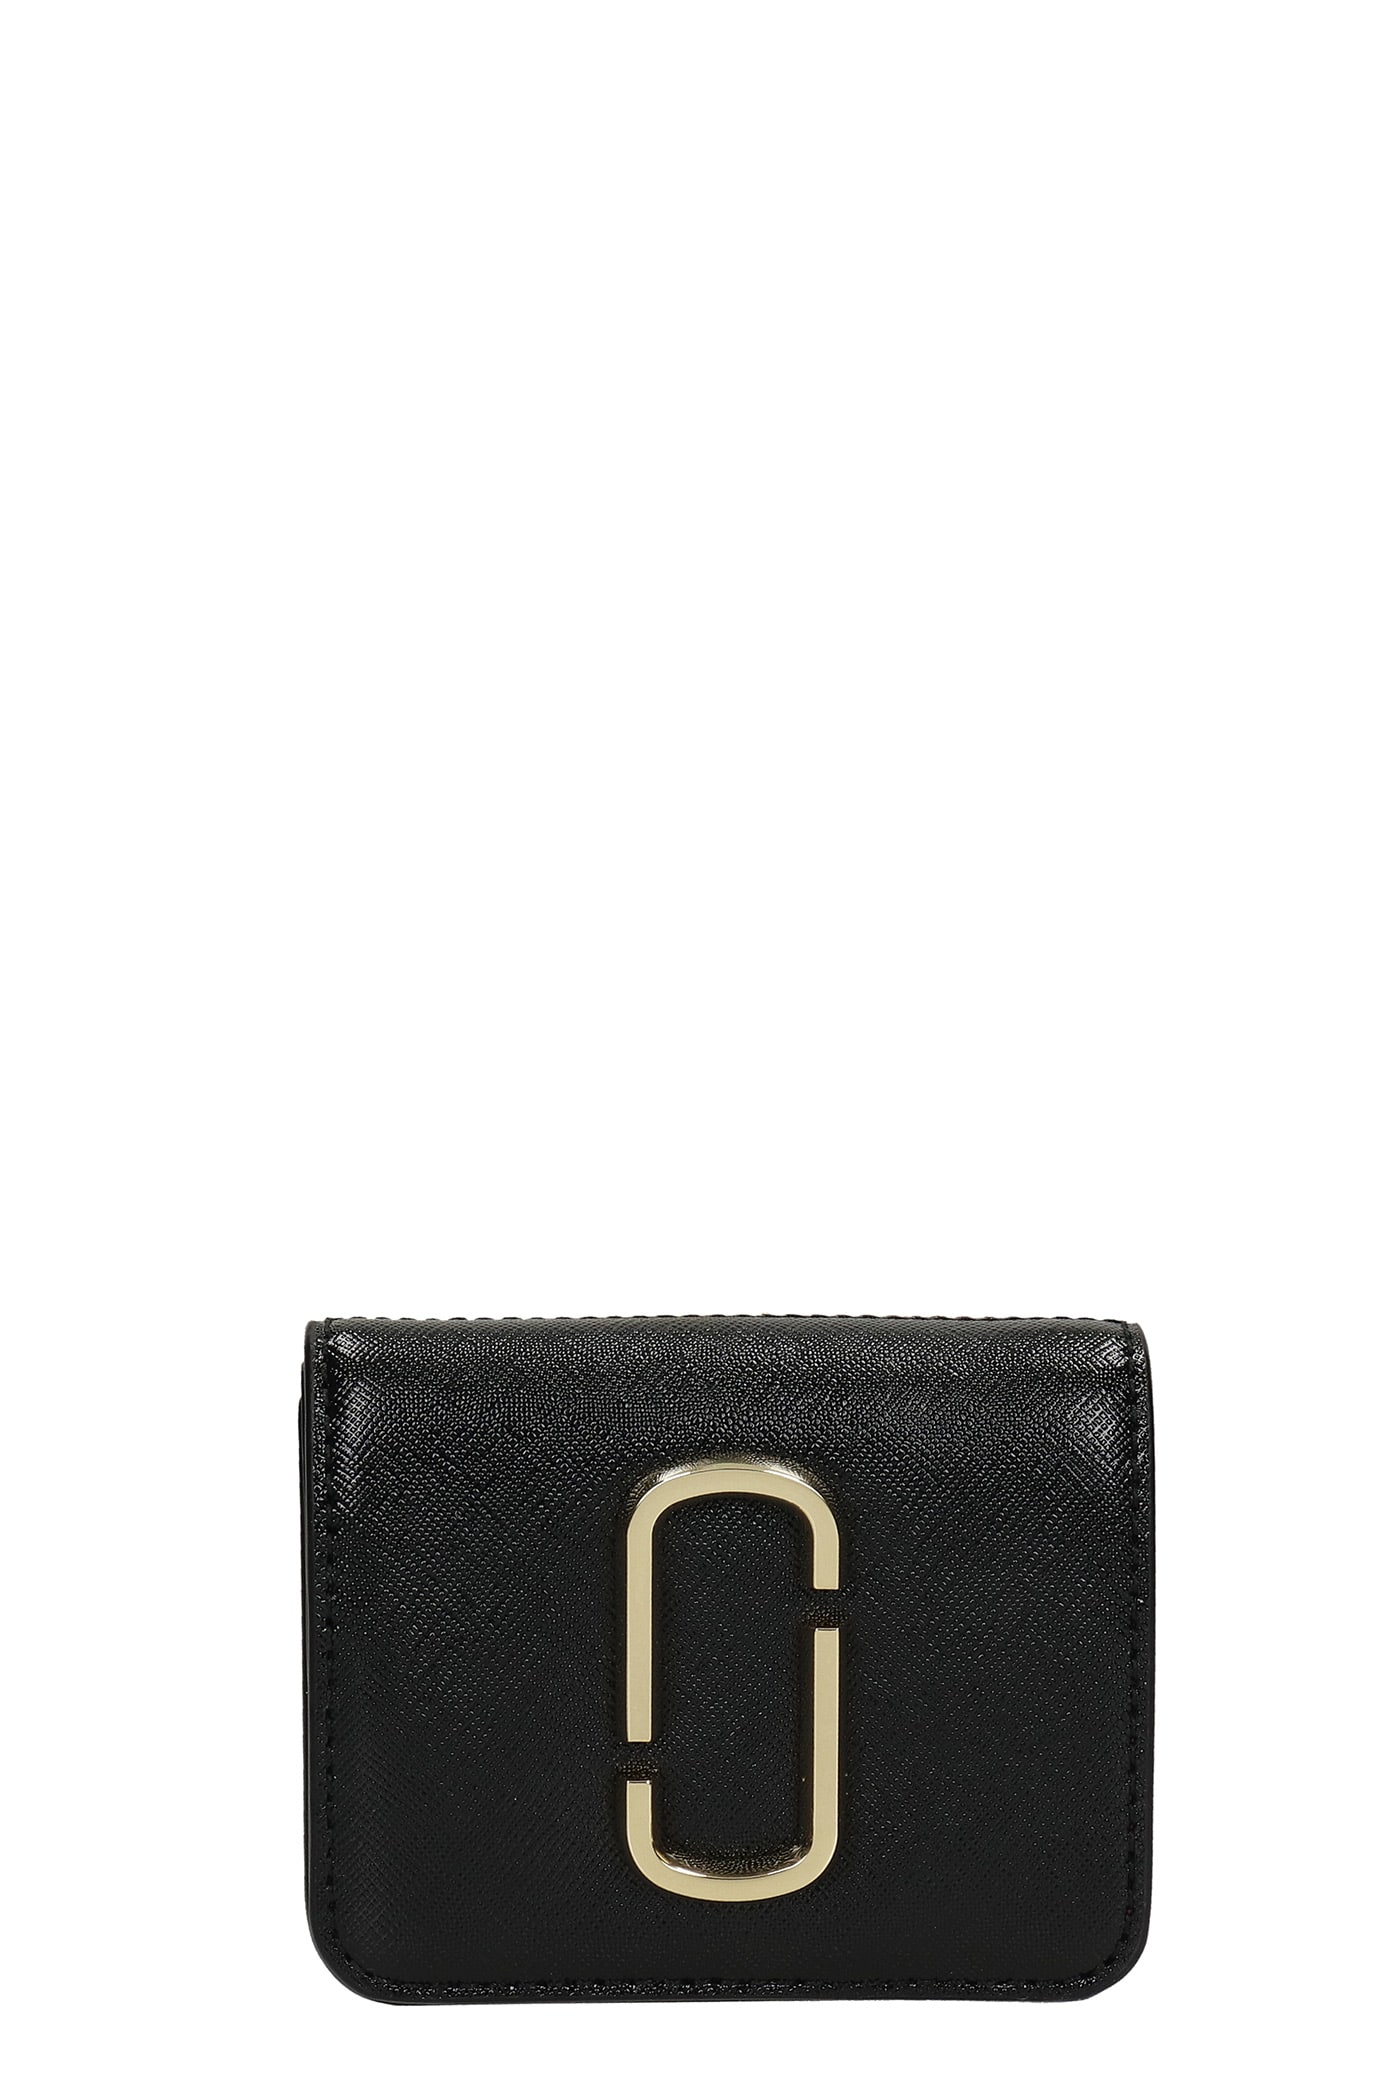 Marc Jacobs New Smal Wallet Wallet In Black Leather